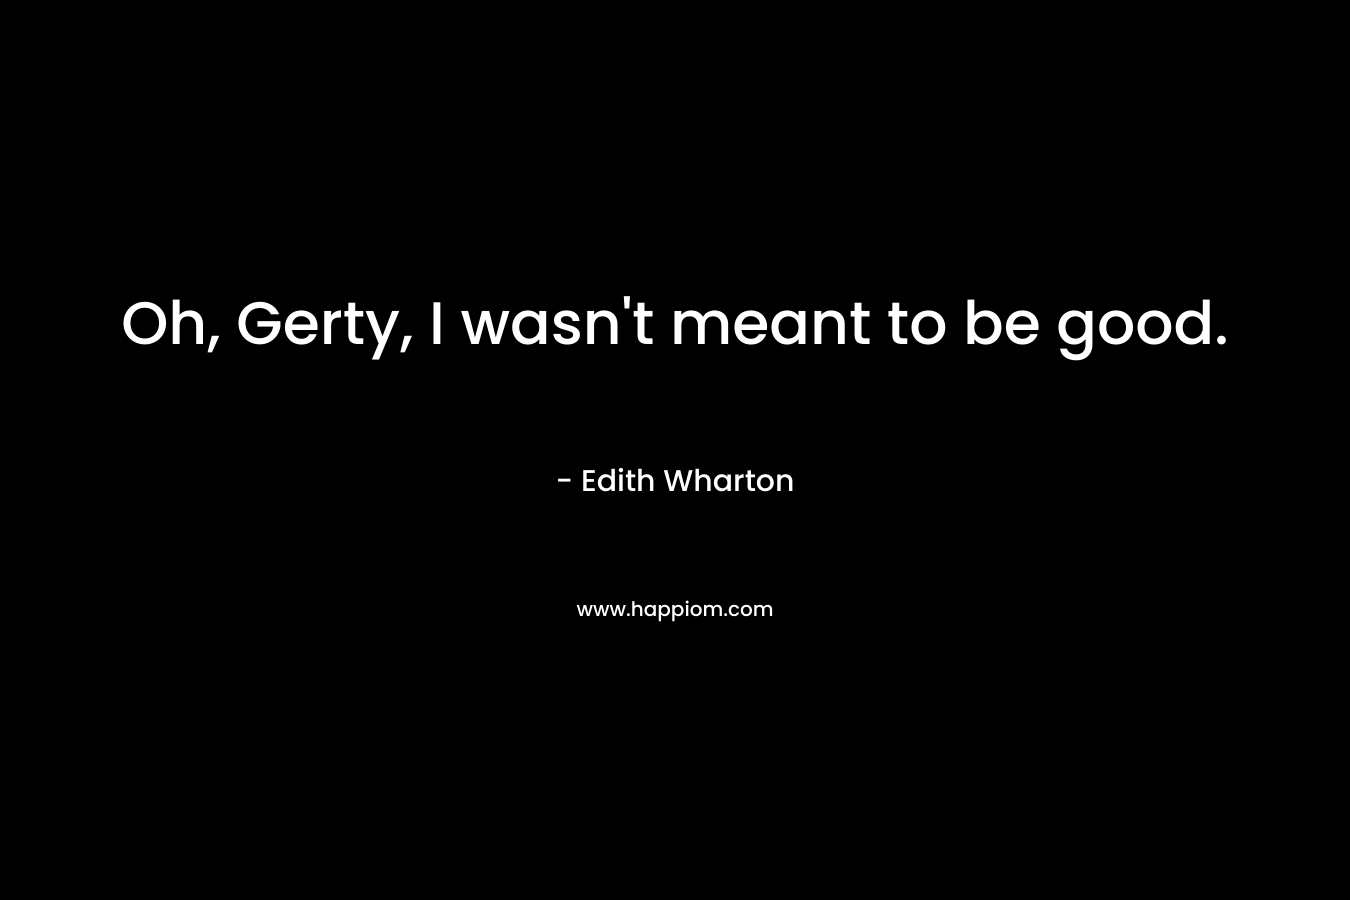 Oh, Gerty, I wasn’t meant to be good. – Edith Wharton